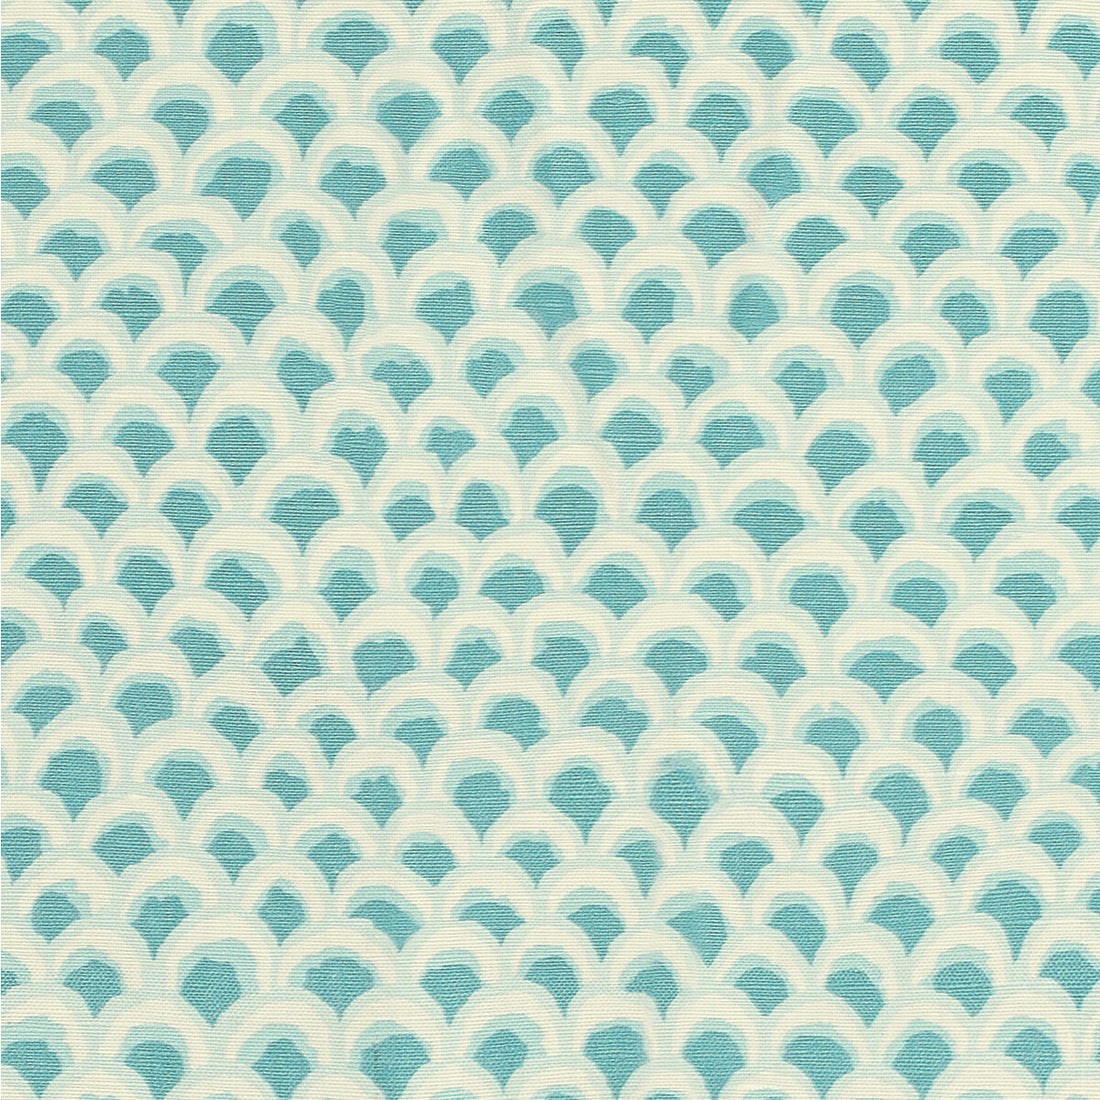 Pave II Print fabric in aqua color - pattern 8020126.113.0 - by Brunschwig &amp; Fils in the Louverne collection